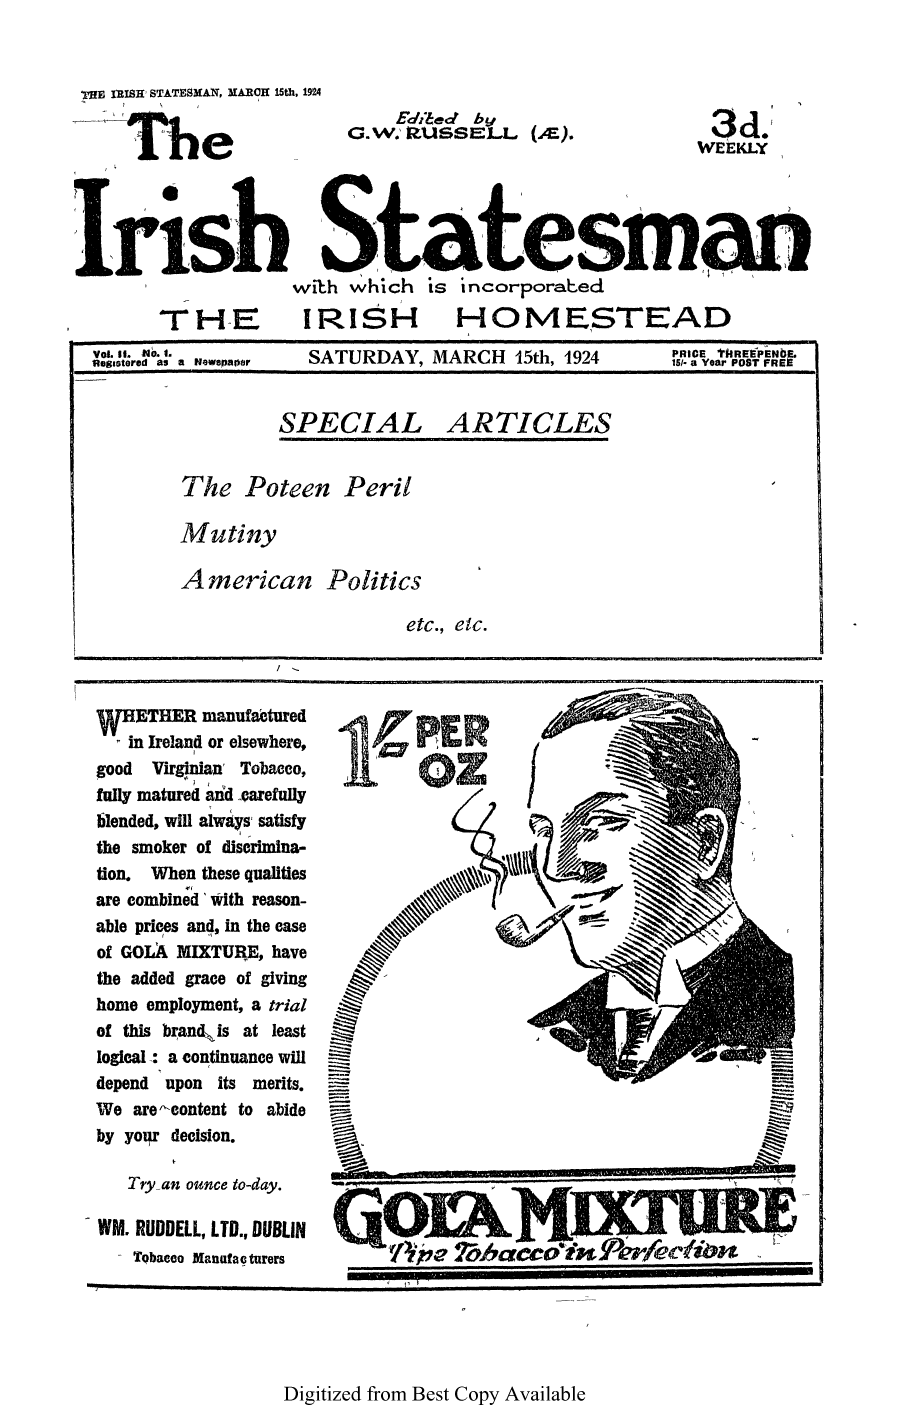 handle is hein.cow/iristatm0002 and id is 1 raw text is: THE IRISH STATESMAN, MARCH 15th, 1924

Edibed by
G.w.' R.USSE1 .J.. (),

3d
WJEKLY

with which is incorporabed
TI-IE      IRISH       HOMESTEAD
VoL It. NO I.             MDH ~PRICE ThRE'IPENbE,
flegitored a$ a Newspaer  SATURDAY, MARCH  15th, 1924  15/- aYear POST FREE
SPECIAL ARTICLES
The Poteen Peril
Mutiny
American Politics
etc., etc.

ETHER manufactured
in Ireland or elsewhere,
good Virginian' Tobacco,
fully matured aidd carefully
blended, will alwysO satisfy
the smoker of discrimina-
tion. When these qualities
are combined 'Iith reason-
able prices and, in the case
of GOLA MIXTURE, have
the added grace of giving
home employment, a trial
of this brand is at least
logical : a continuance will
depend upon its merits.
We arecontent to abide
by yoiqr decision.

WM. RUDDELL, LTD., DUBLIN
- Tobacco Manatacturers

111

Digitized from Best Copy Available


